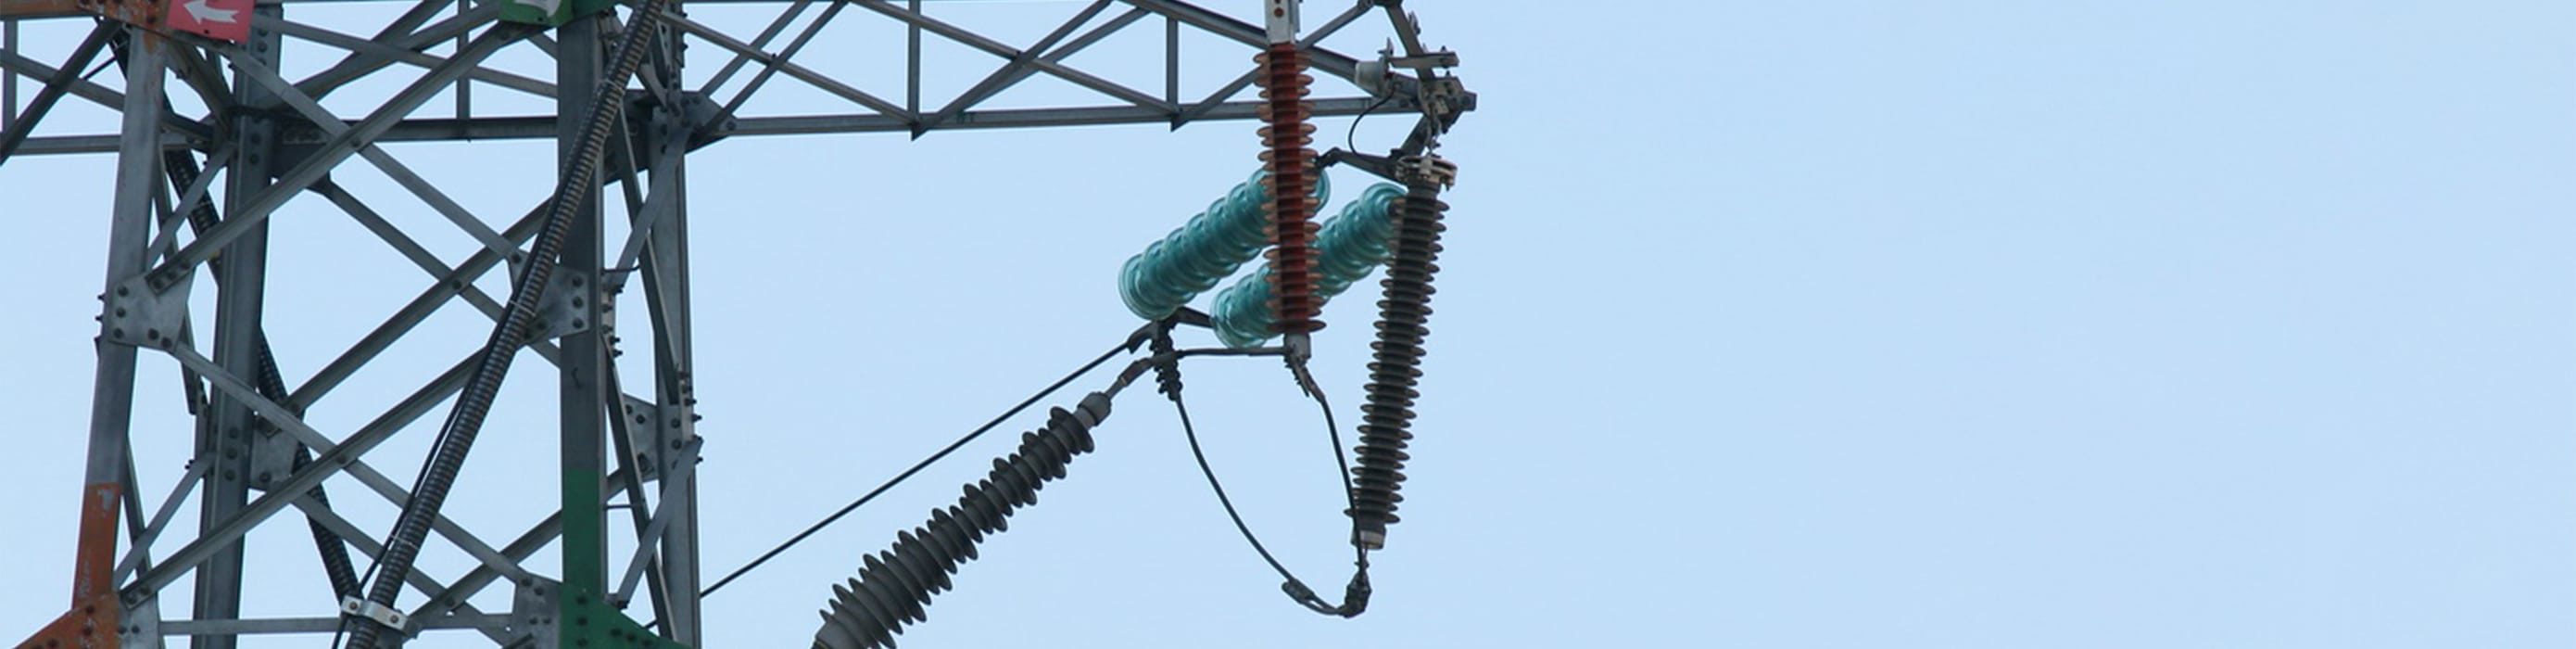 Cable accessories on a large tower.